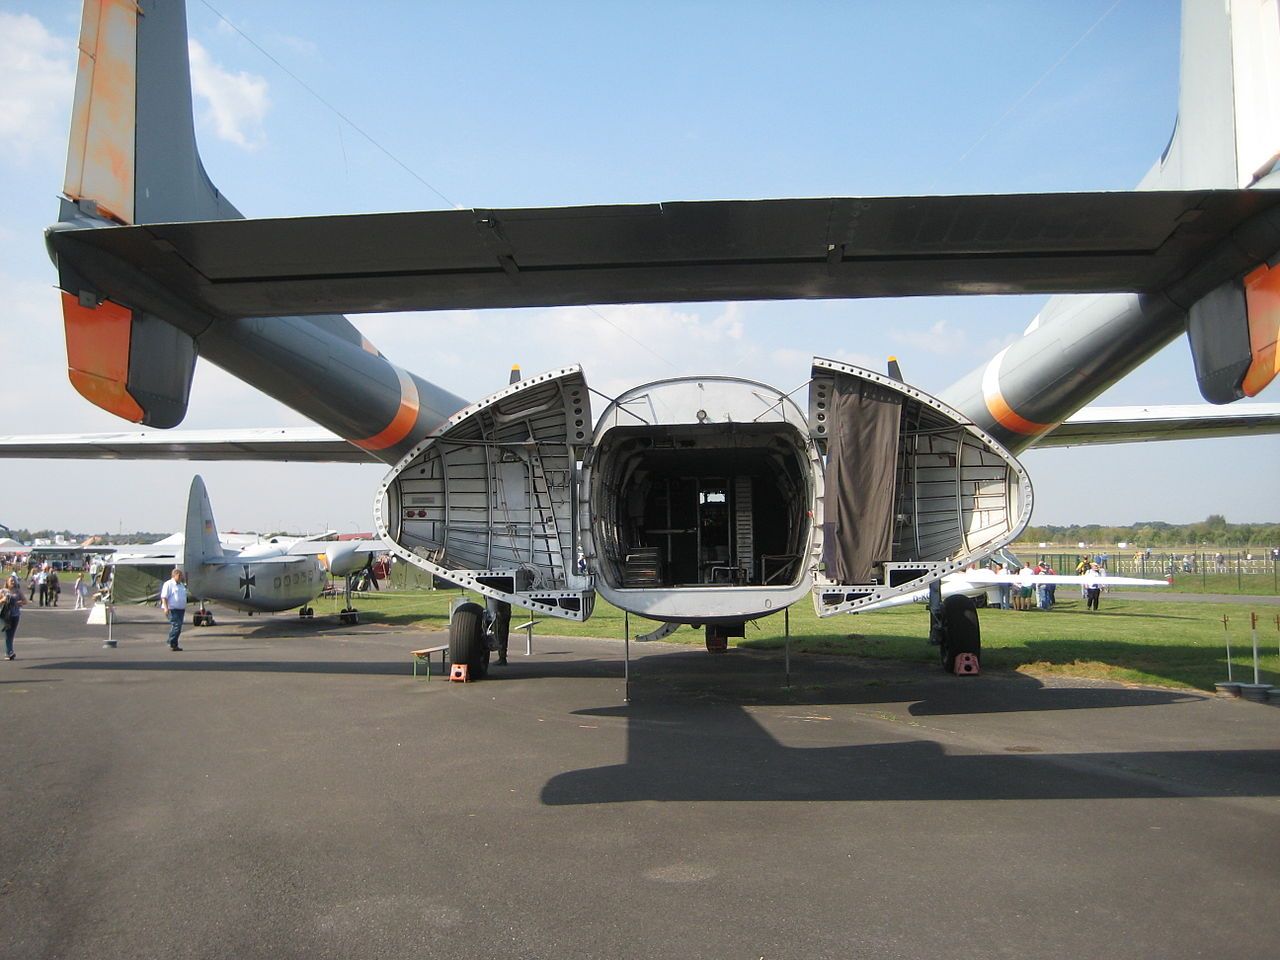 The Nord Noratlas with its clamshell cargo doors open